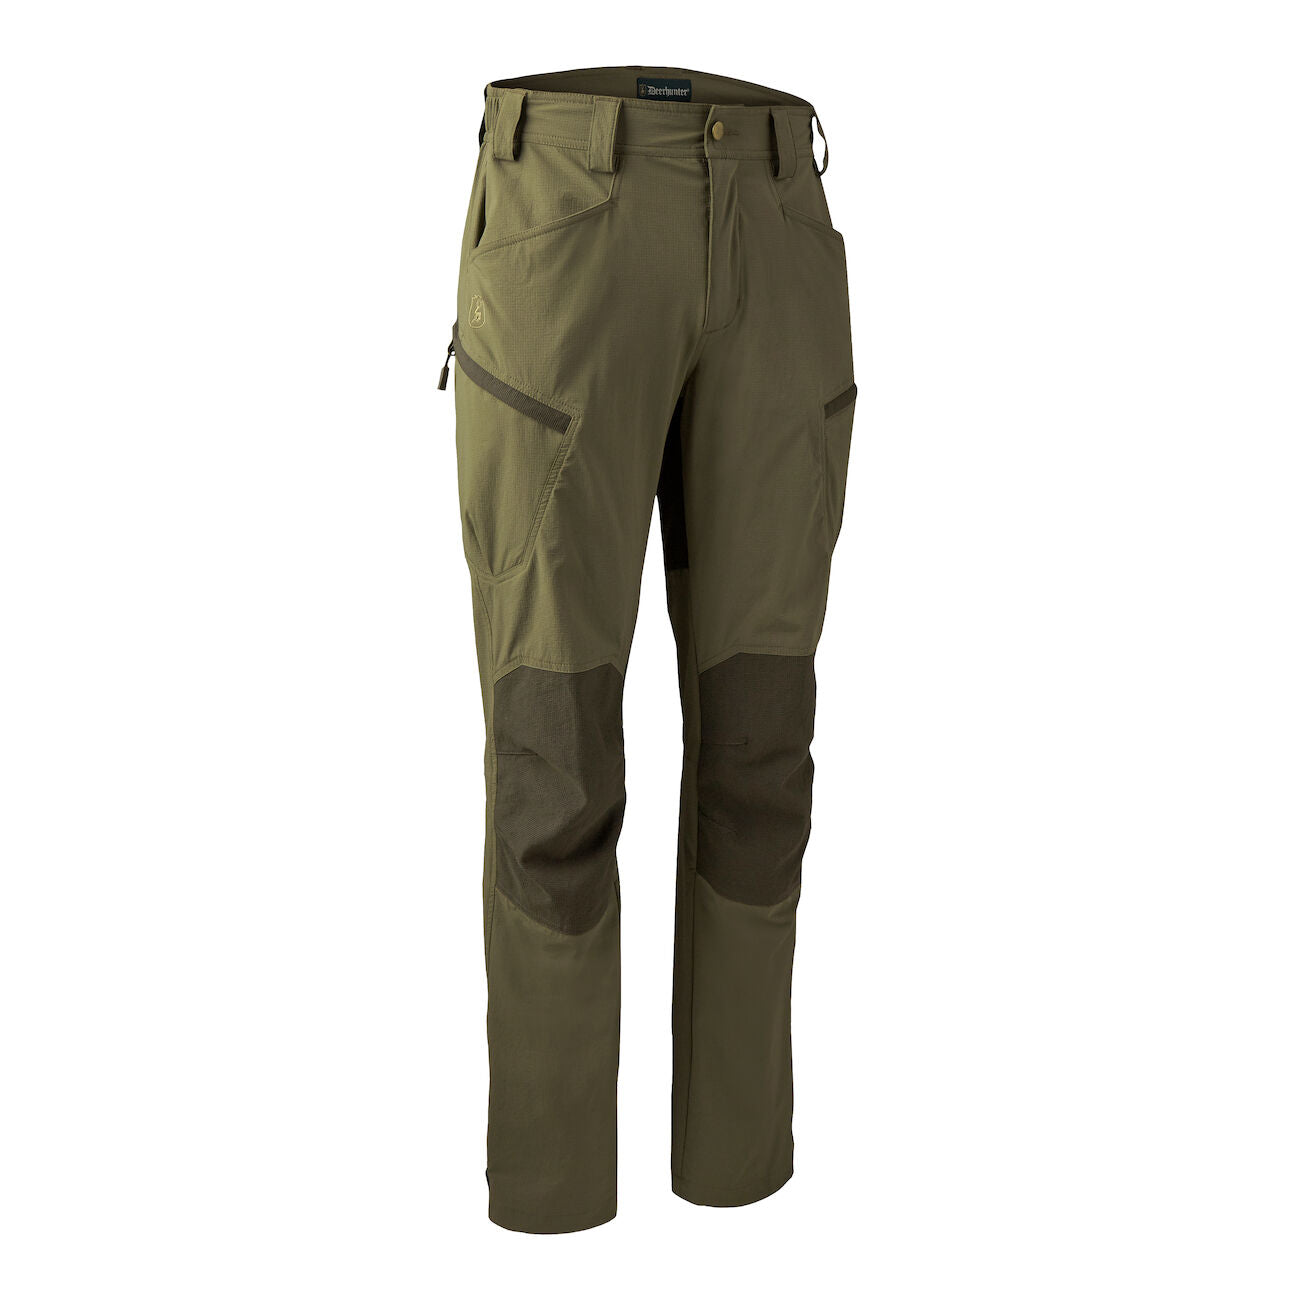 Buggy anti-insect broek